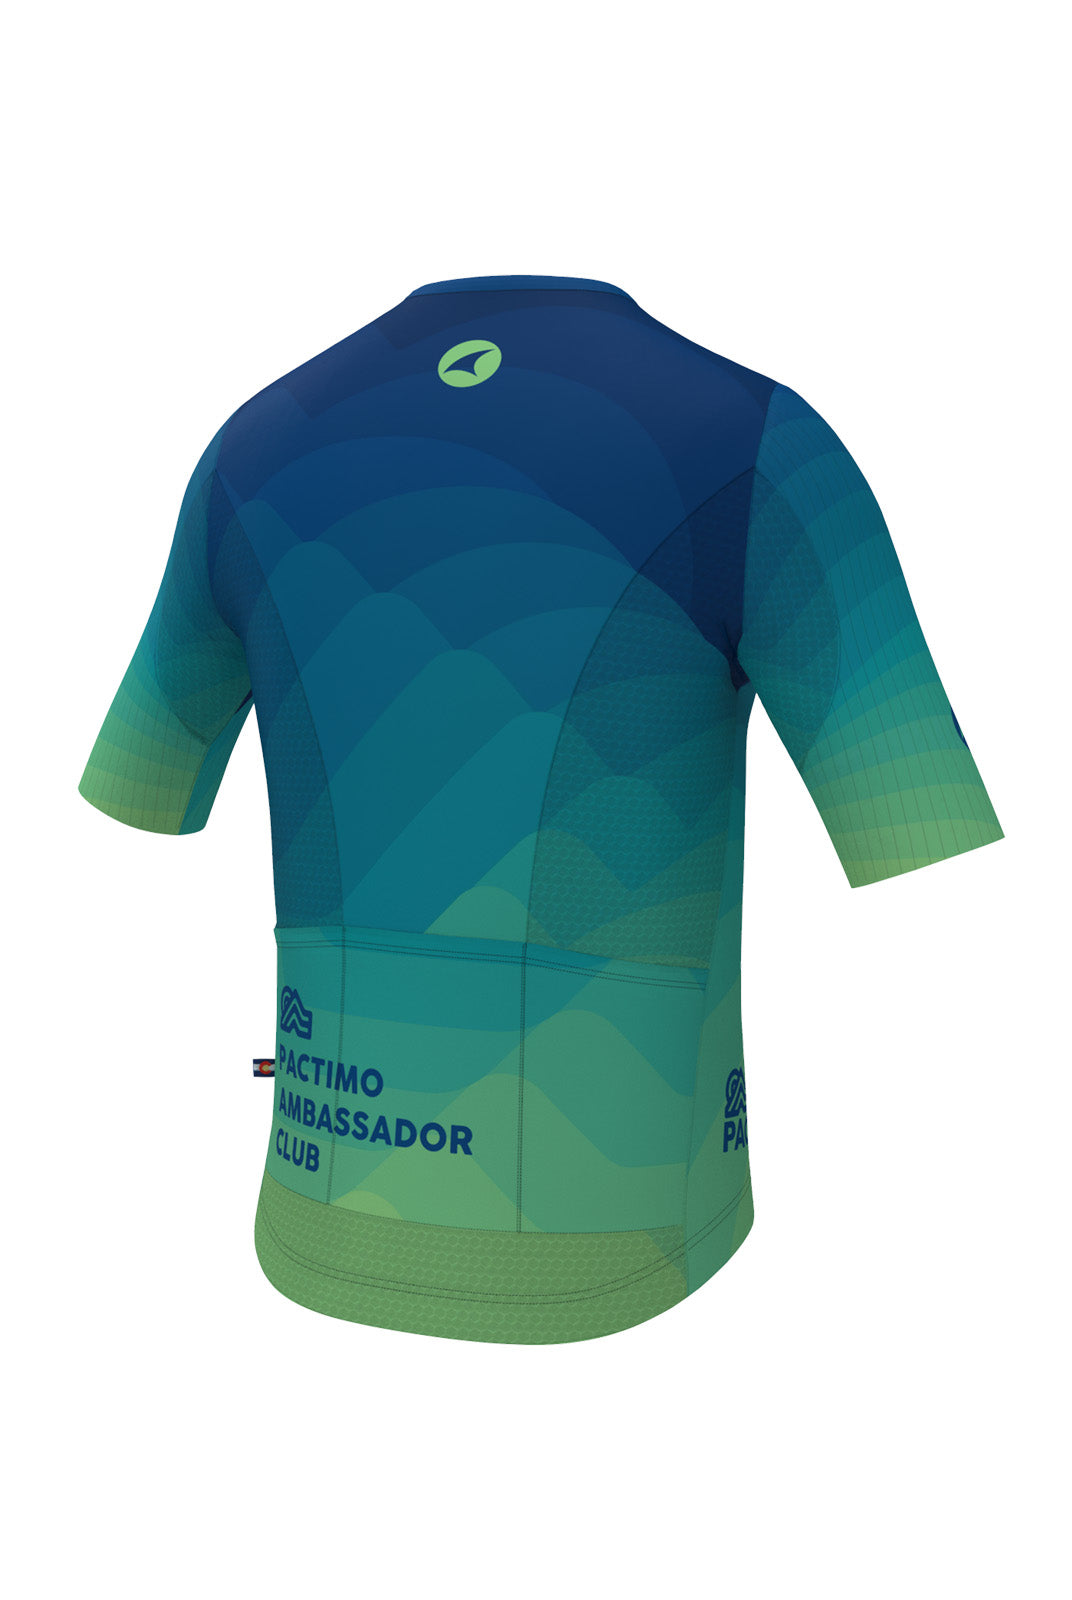 Men's PAC Flyte Cycling Jersey - Twighlight Back View